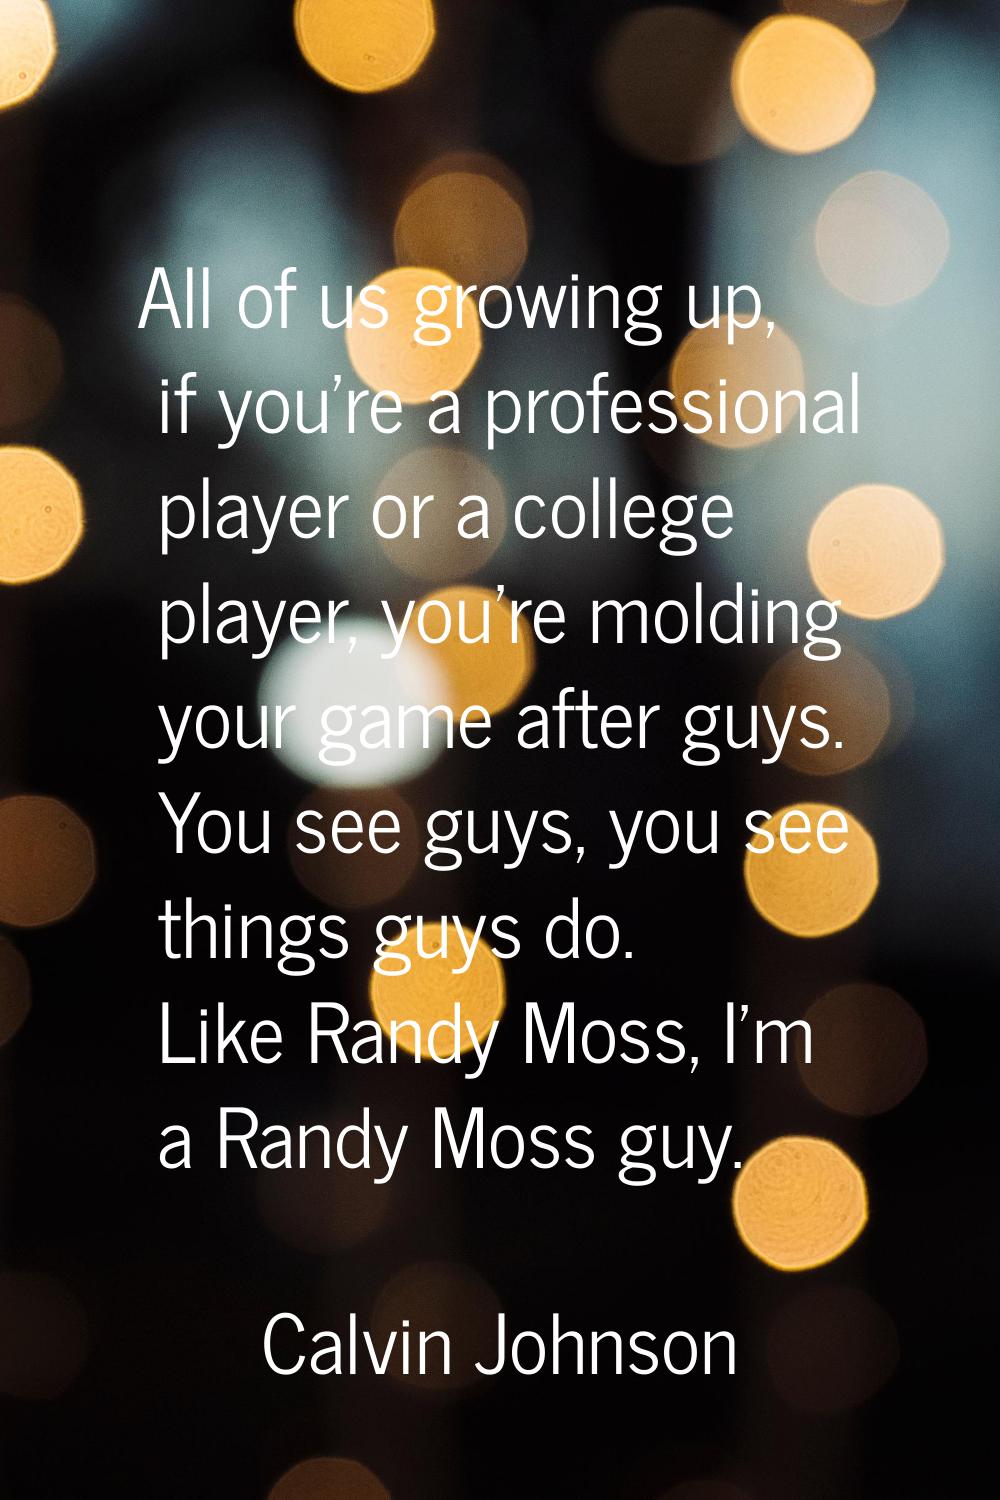 All of us growing up, if you're a professional player or a college player, you're molding your game